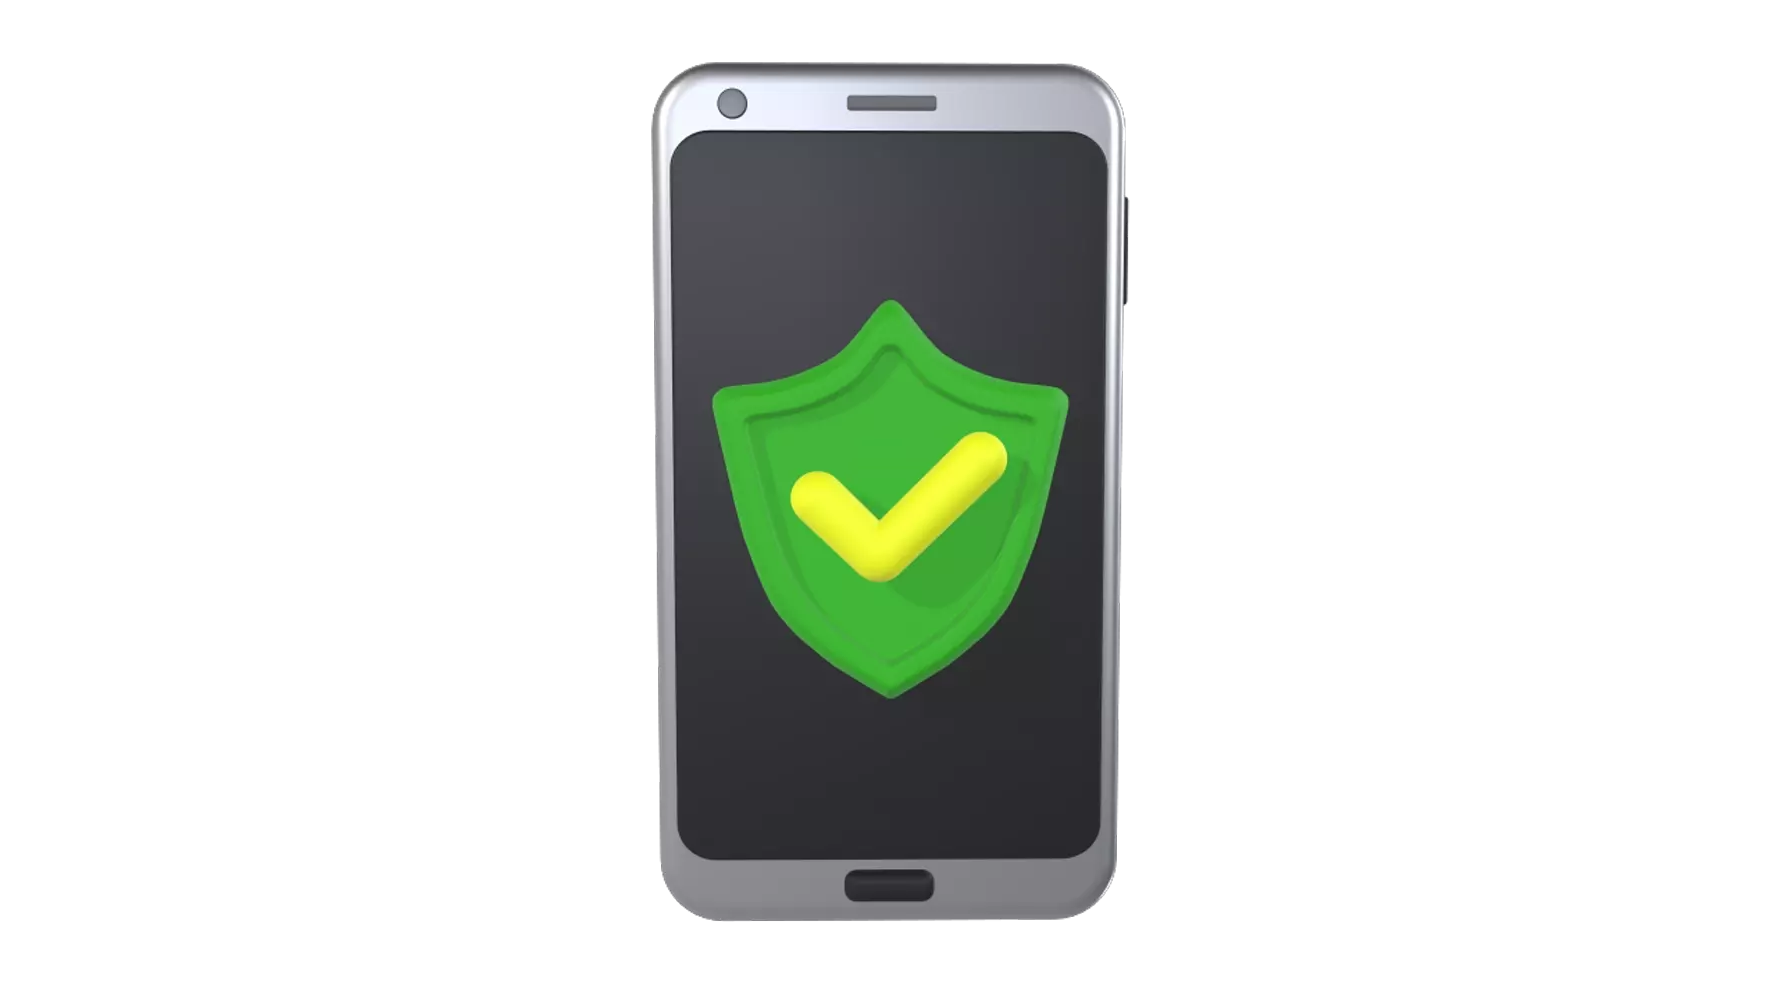 Mobile Security 3D Graphic